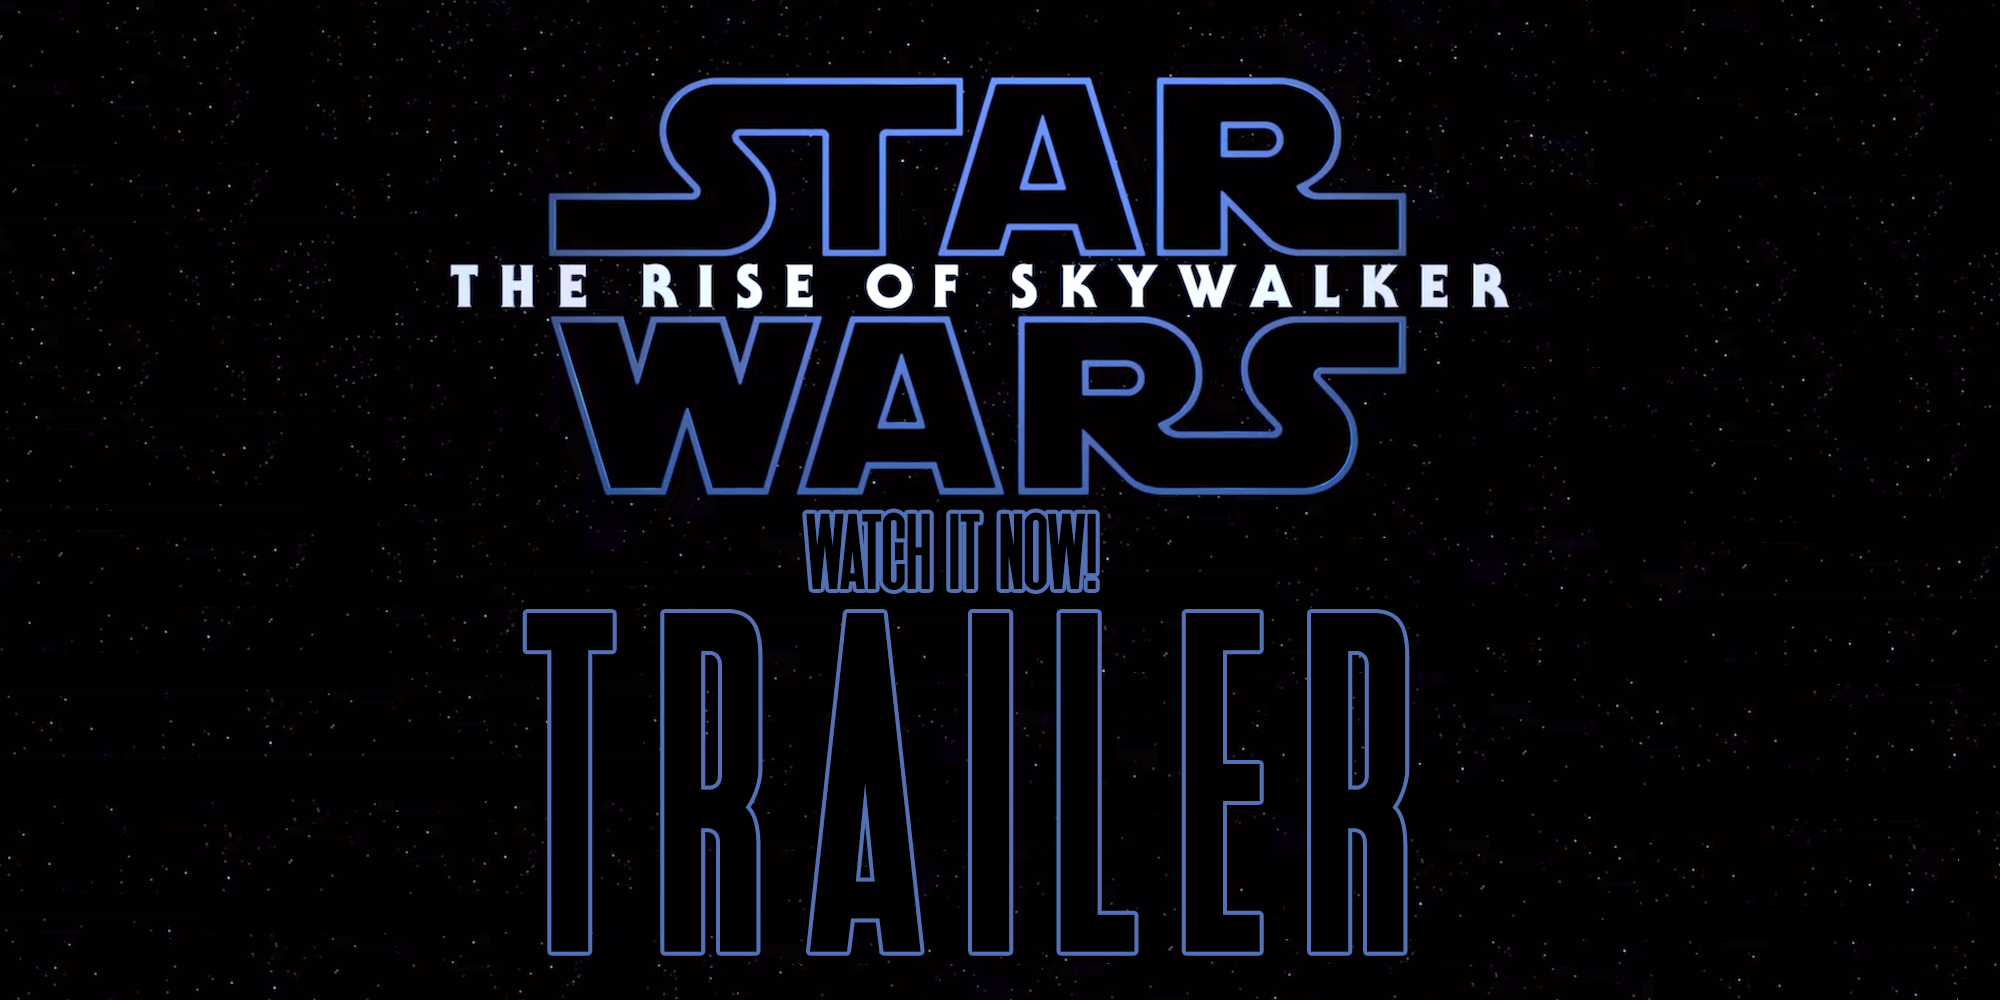 Watch The Rise Of Skywalker Trailer Now!